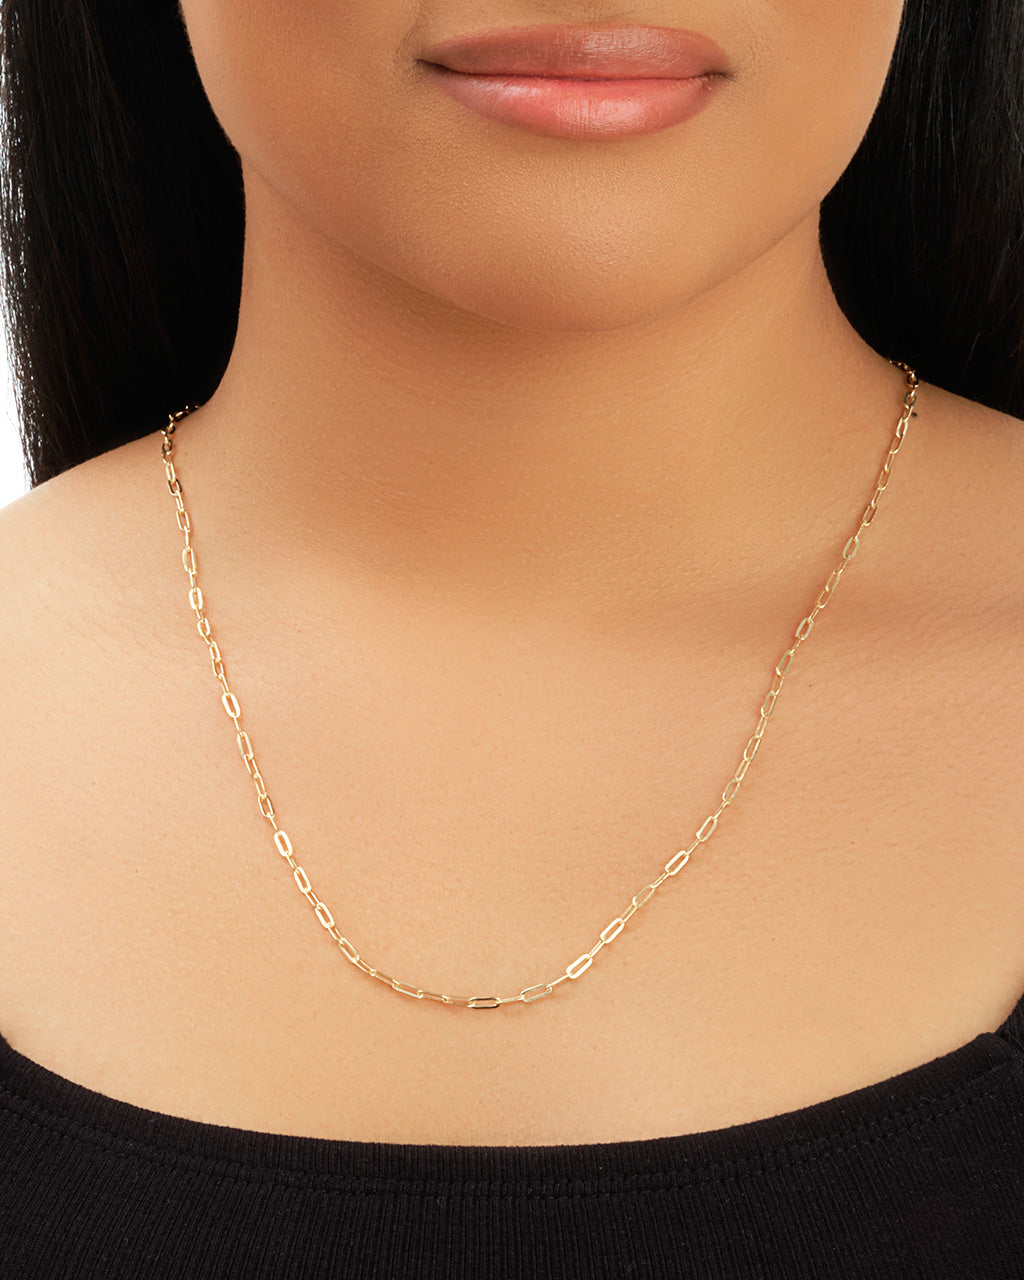 14K Yellow Gold Paperclip Necklace with Heart Pendant - Josephs Jewelers